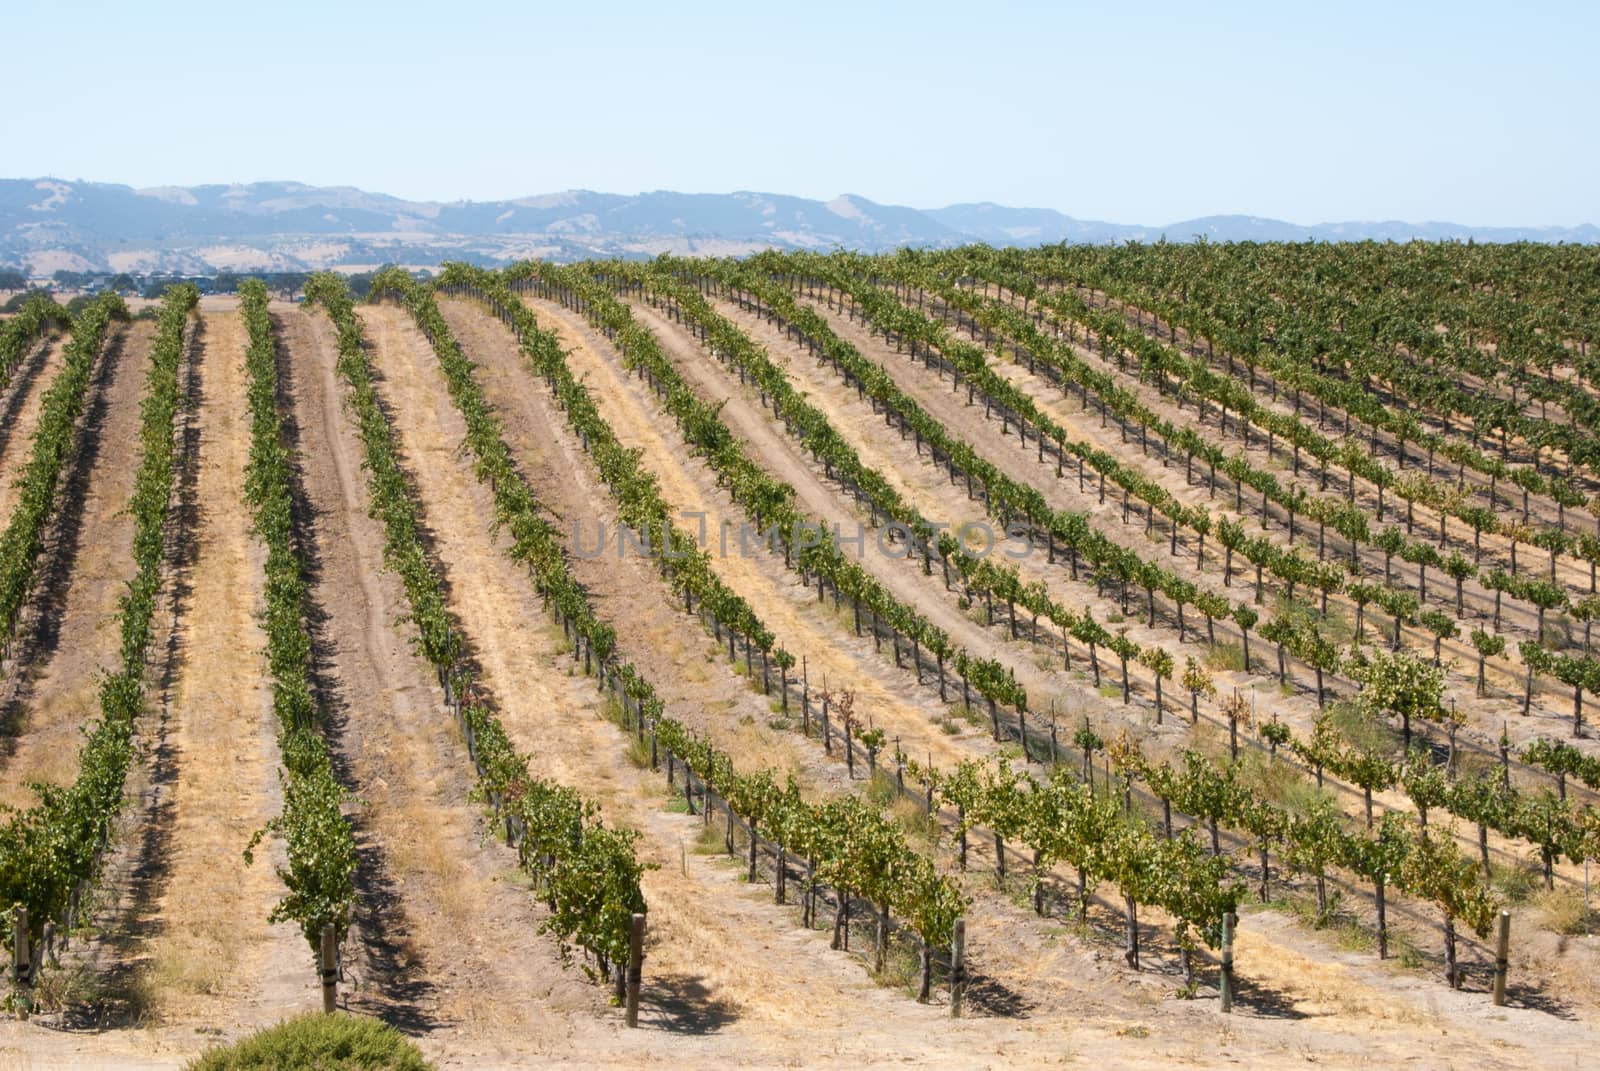 Grapevives on sloping hill of California